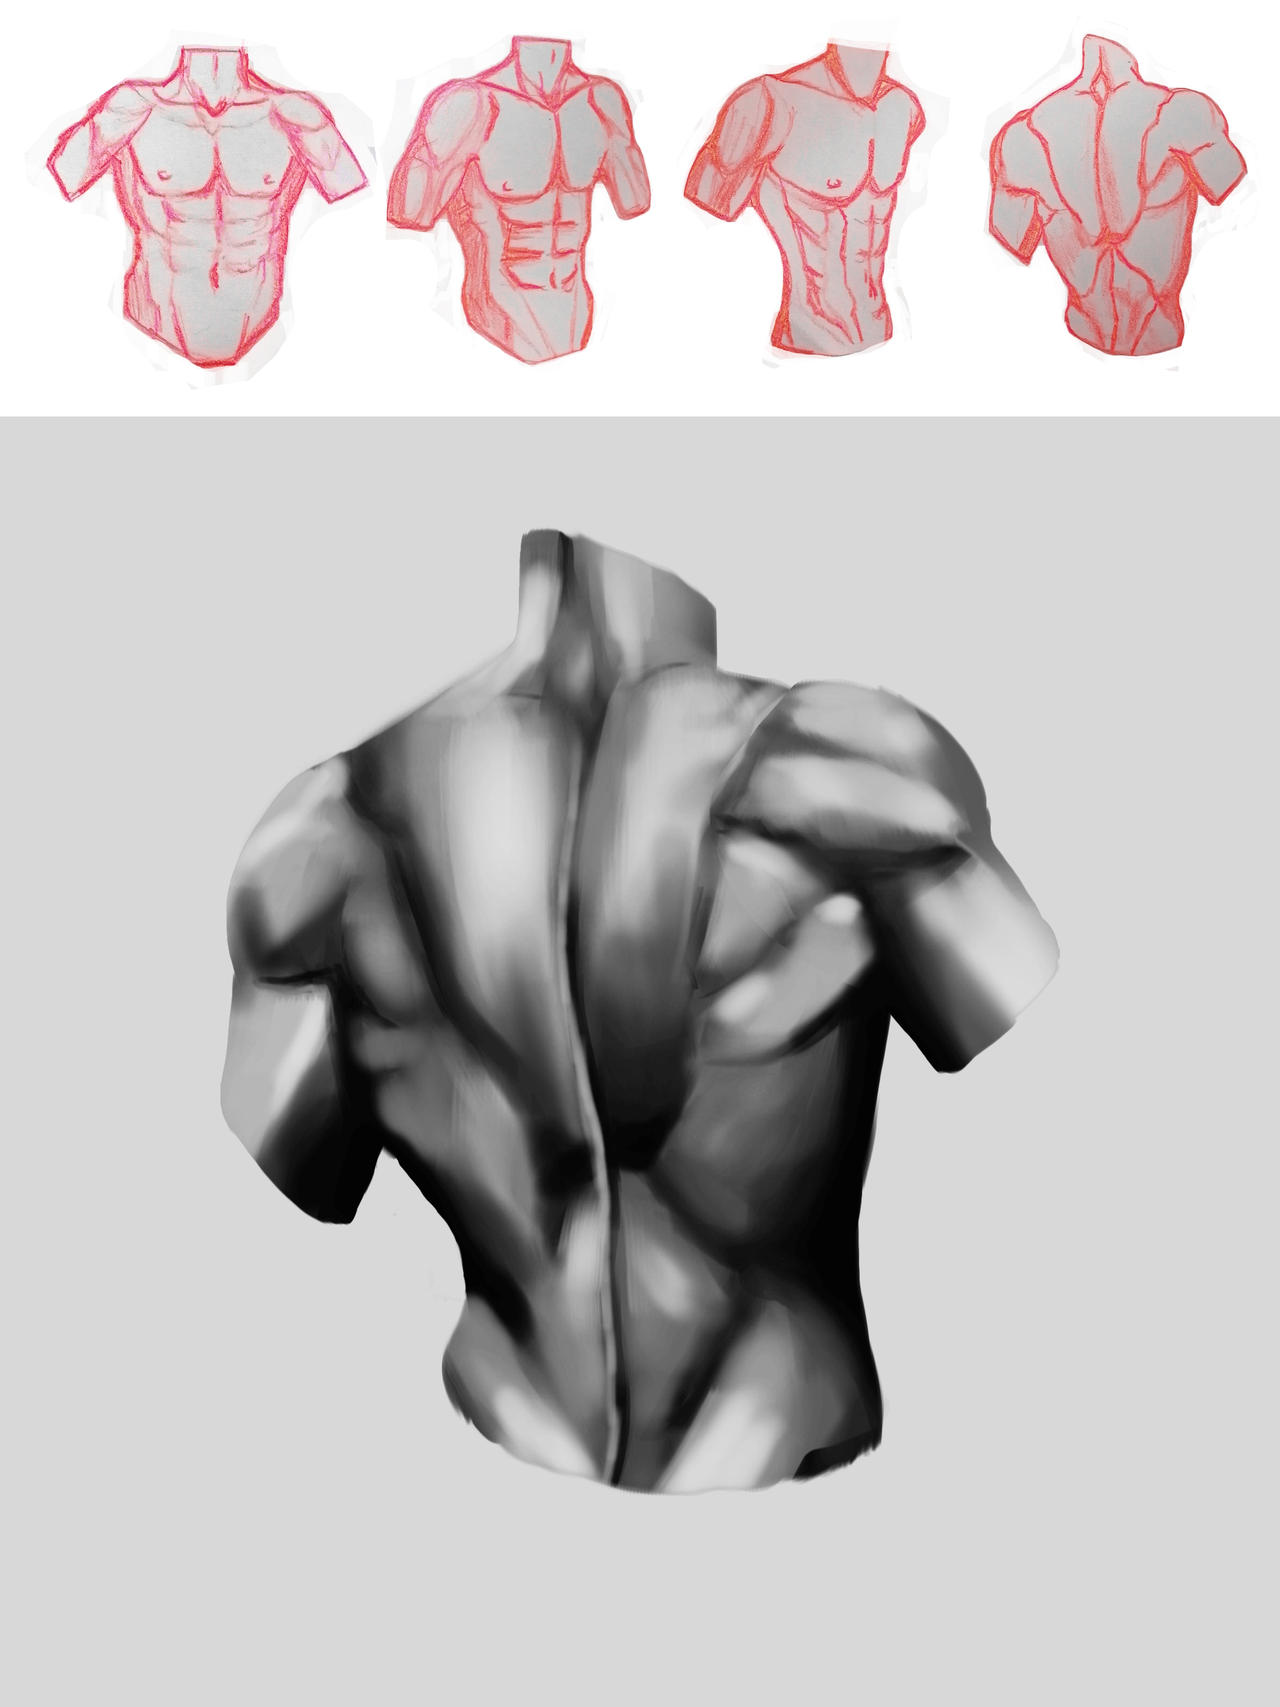 Sketchy Back Muscles Study Upper Body (male) by Anarxshe on DeviantArt